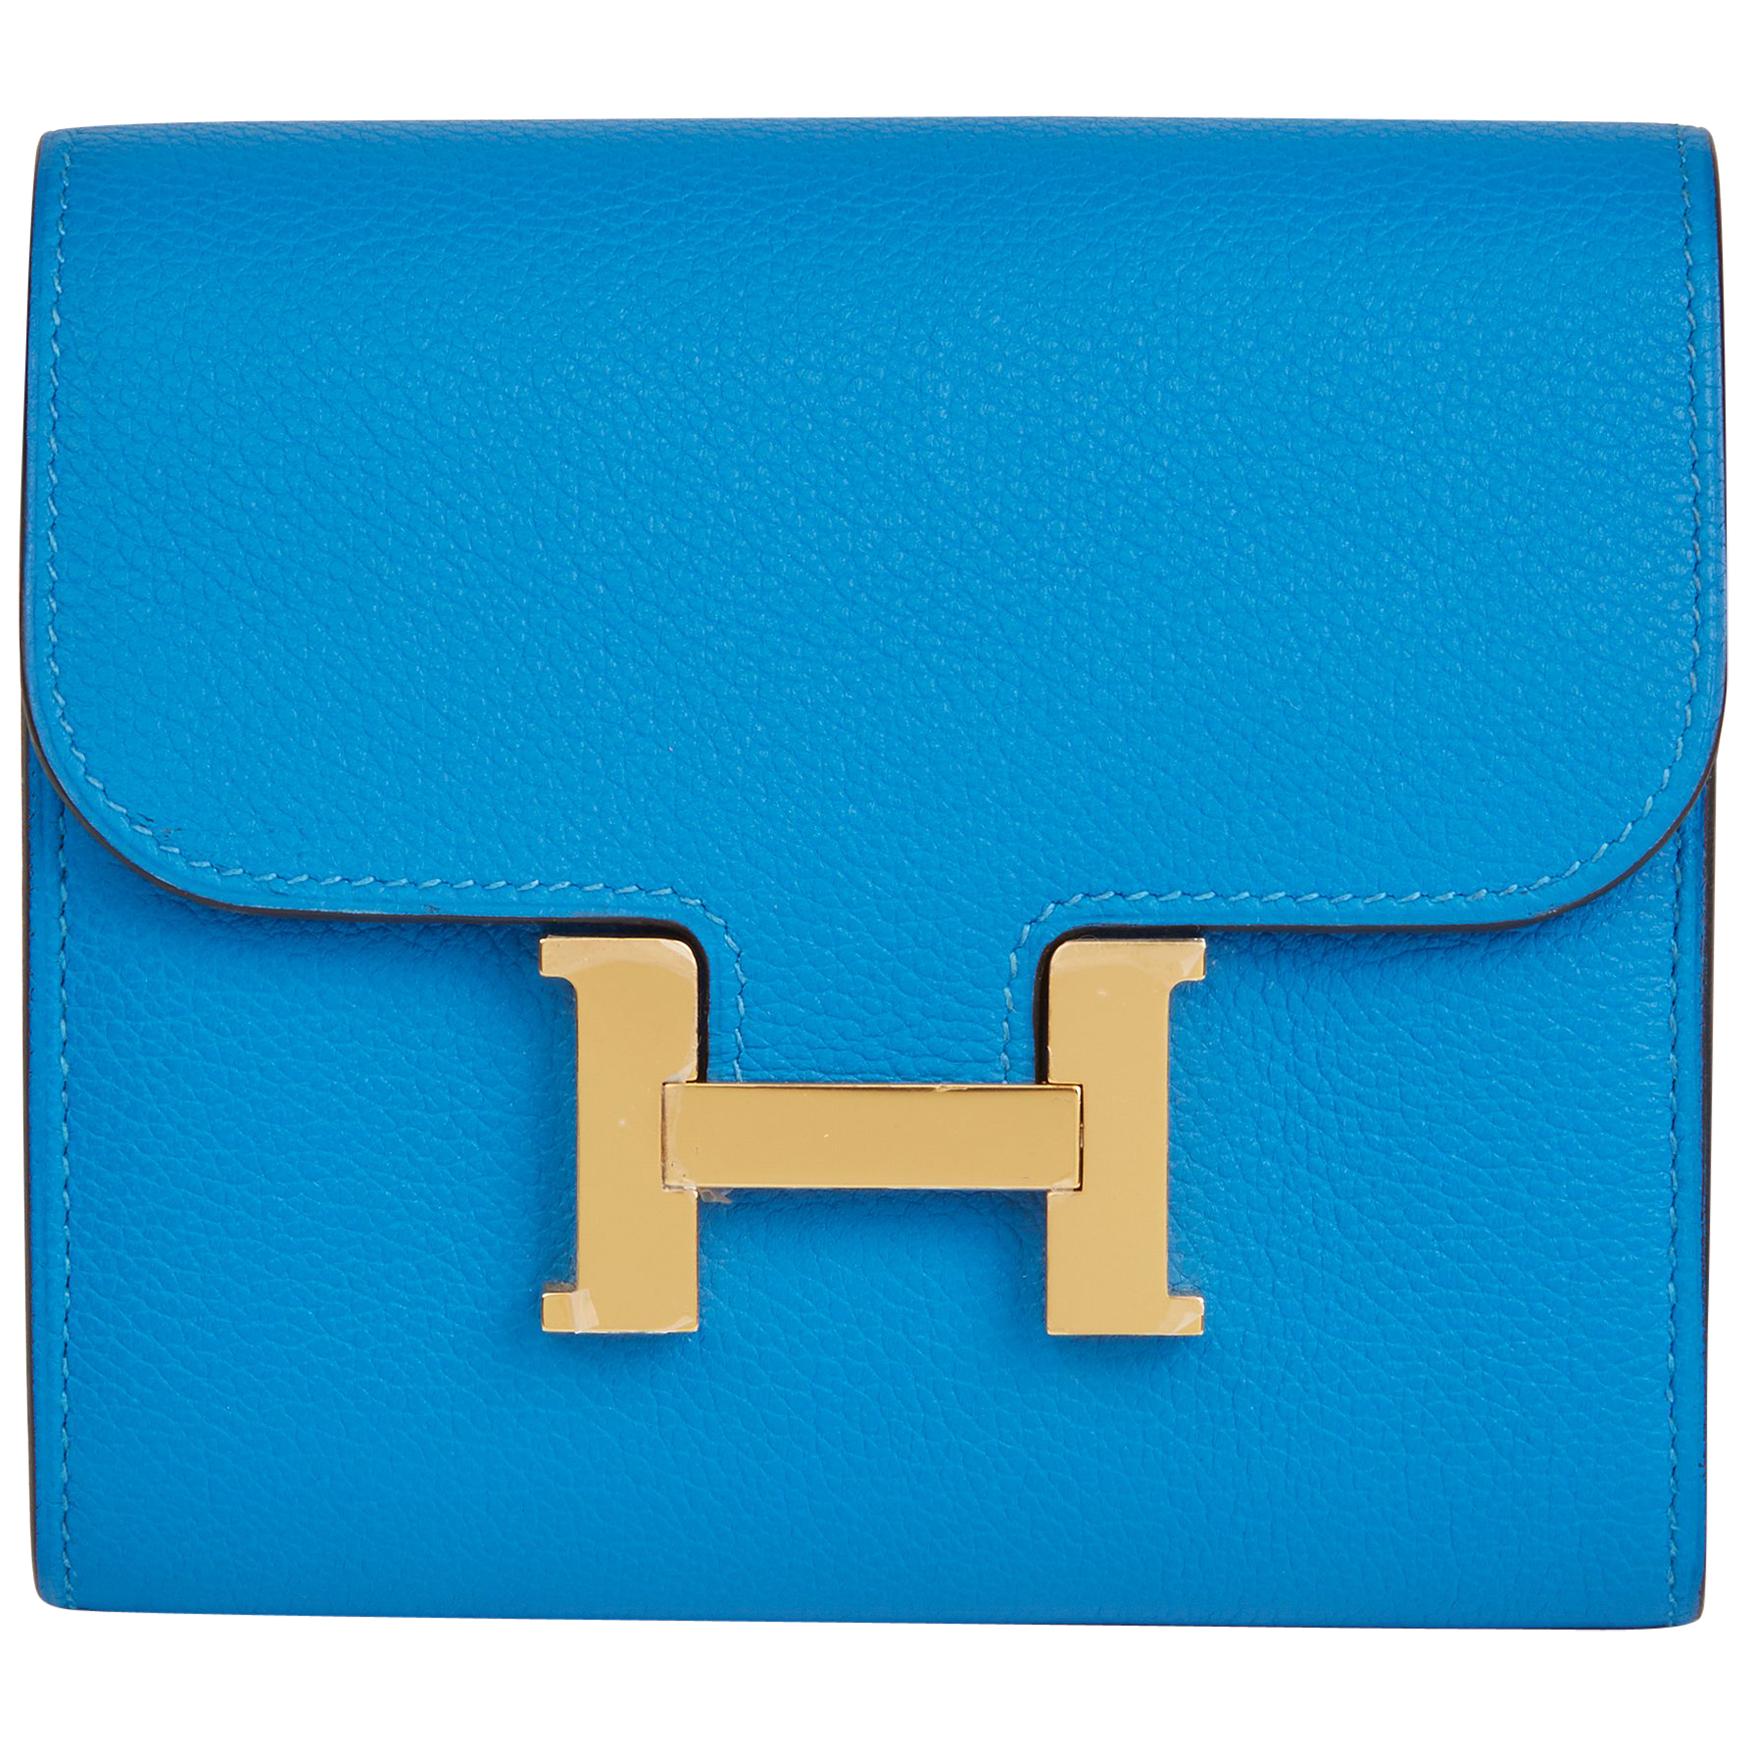 2018 Hermes Blue Hydra Evercolor Leather Constance Compact Wallet